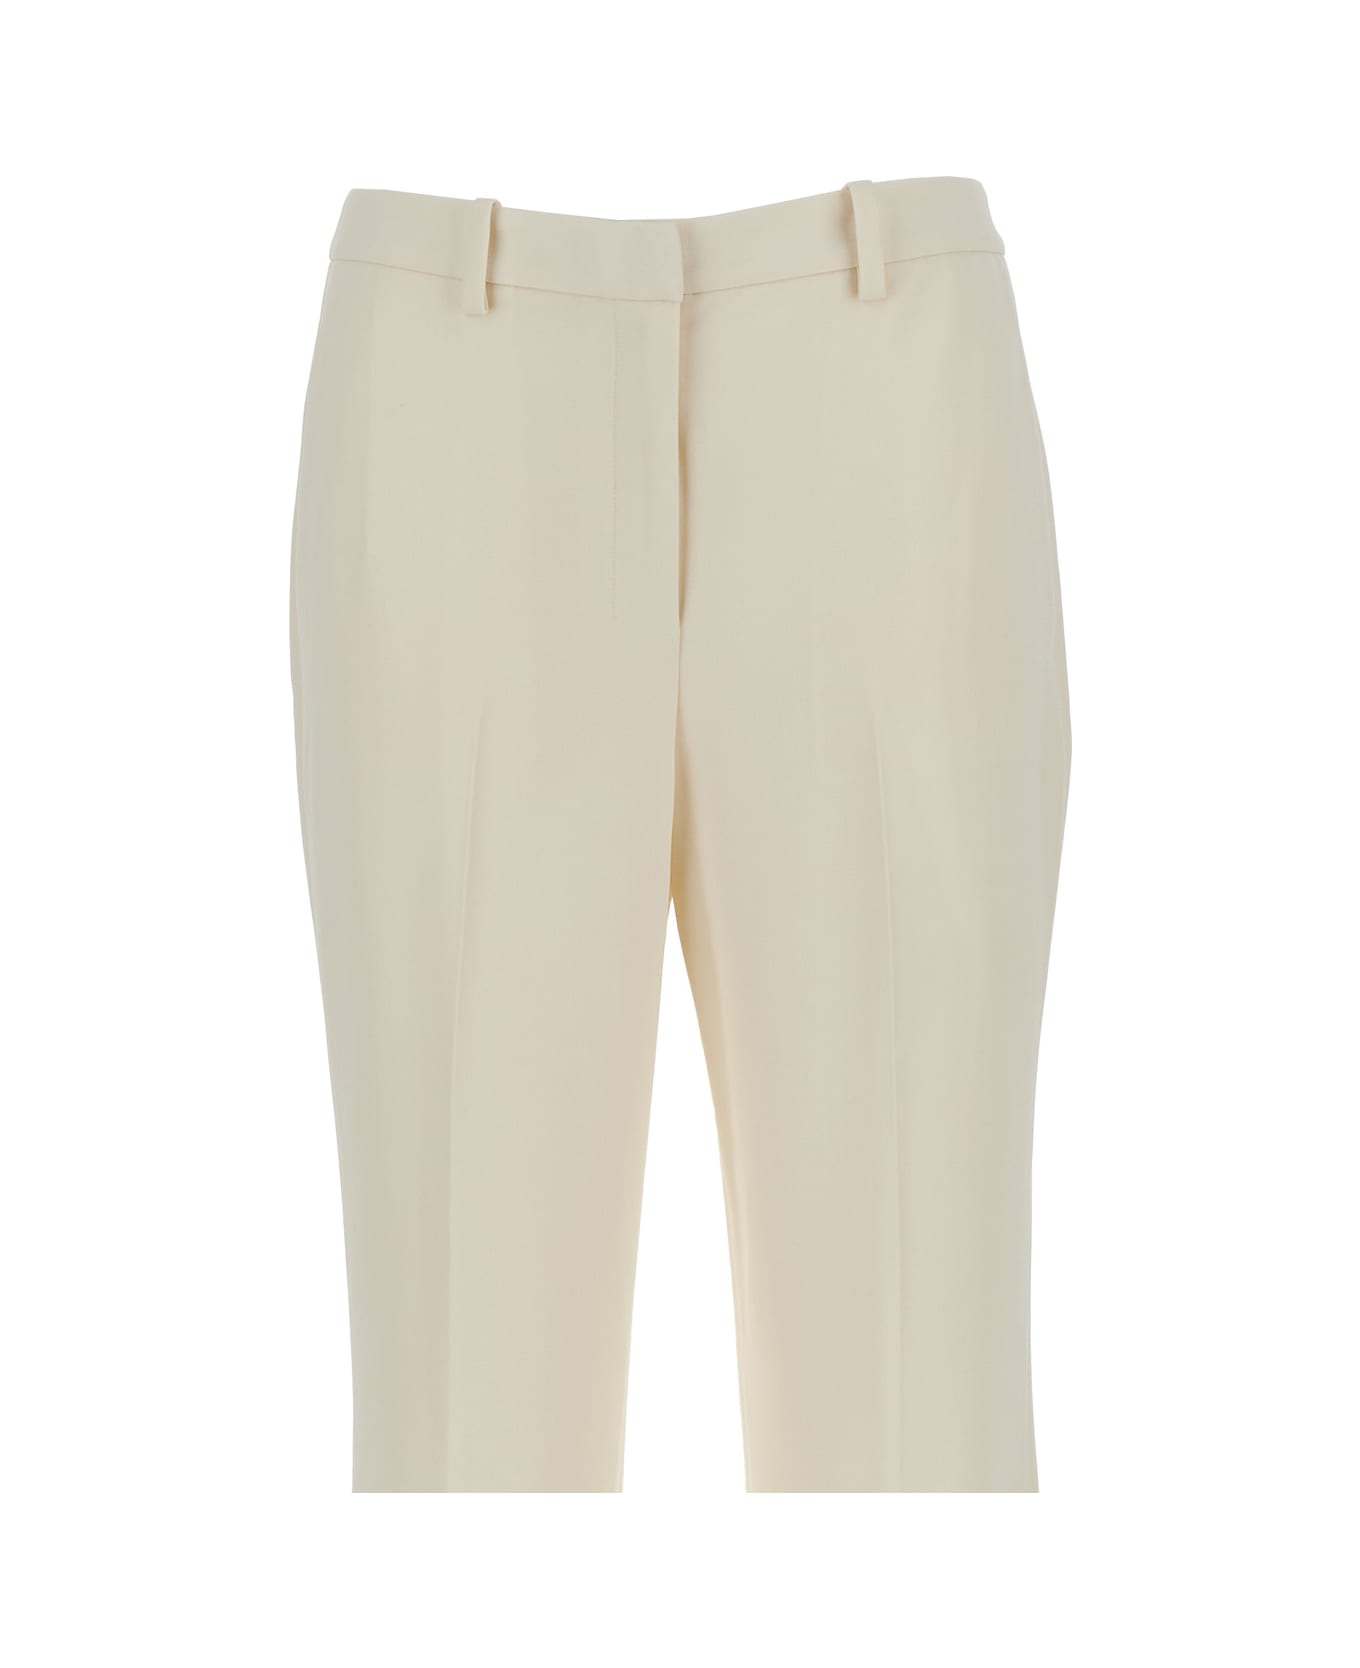 Theory Ivory White Sartorial Pants With Stretch Pleat In Technical Fabric Woman - White